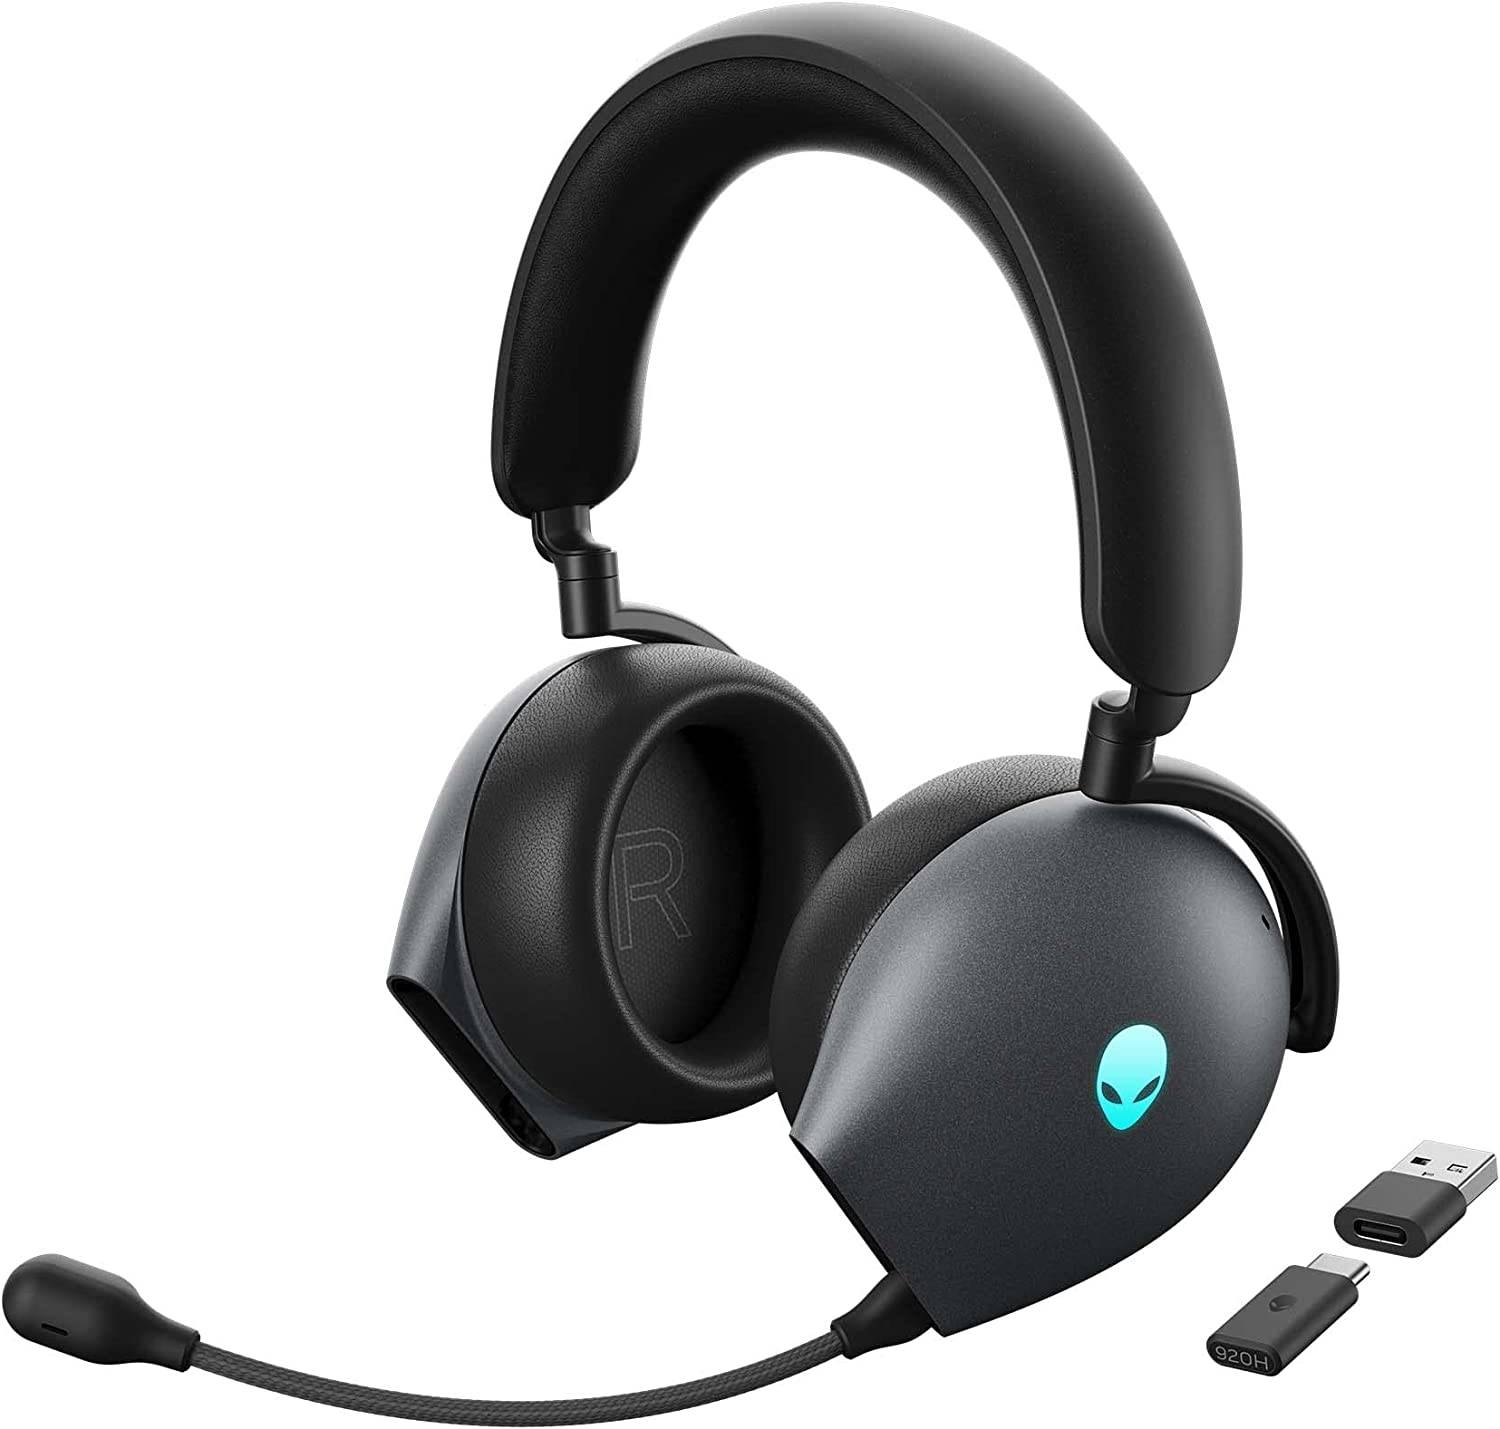 Alienware AW920H Tri-Mode Wireless RGB Gaming Headset, Dolby Atmos Virtual Surround Sound, ANC, AI-Driven NC Microphone, 55H Battery, USB-C Wireless Dongle